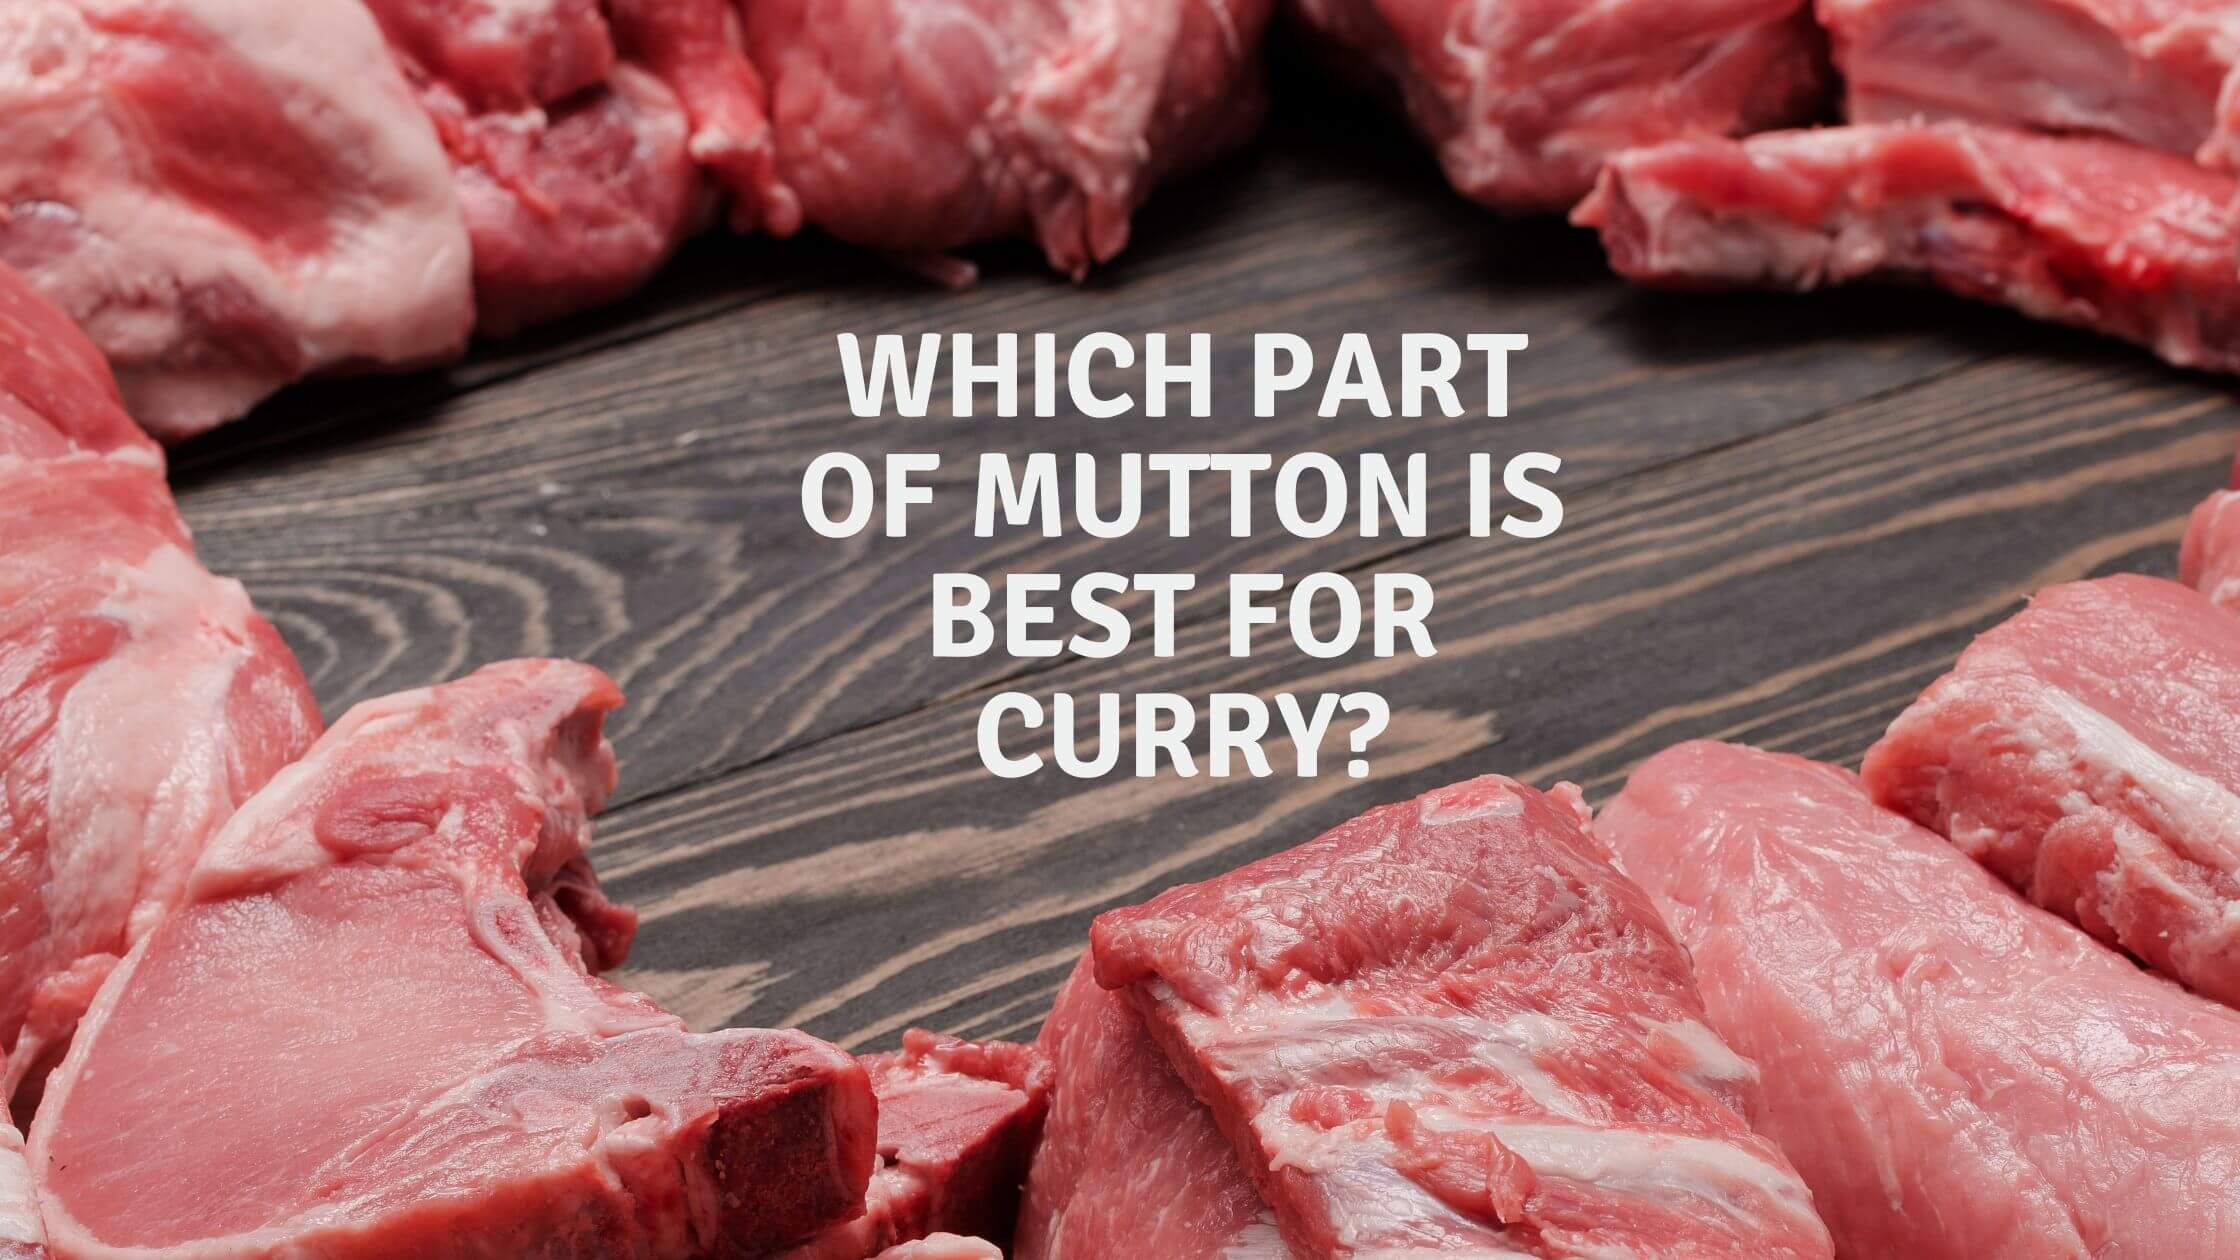 Which part of mutton is best for curry